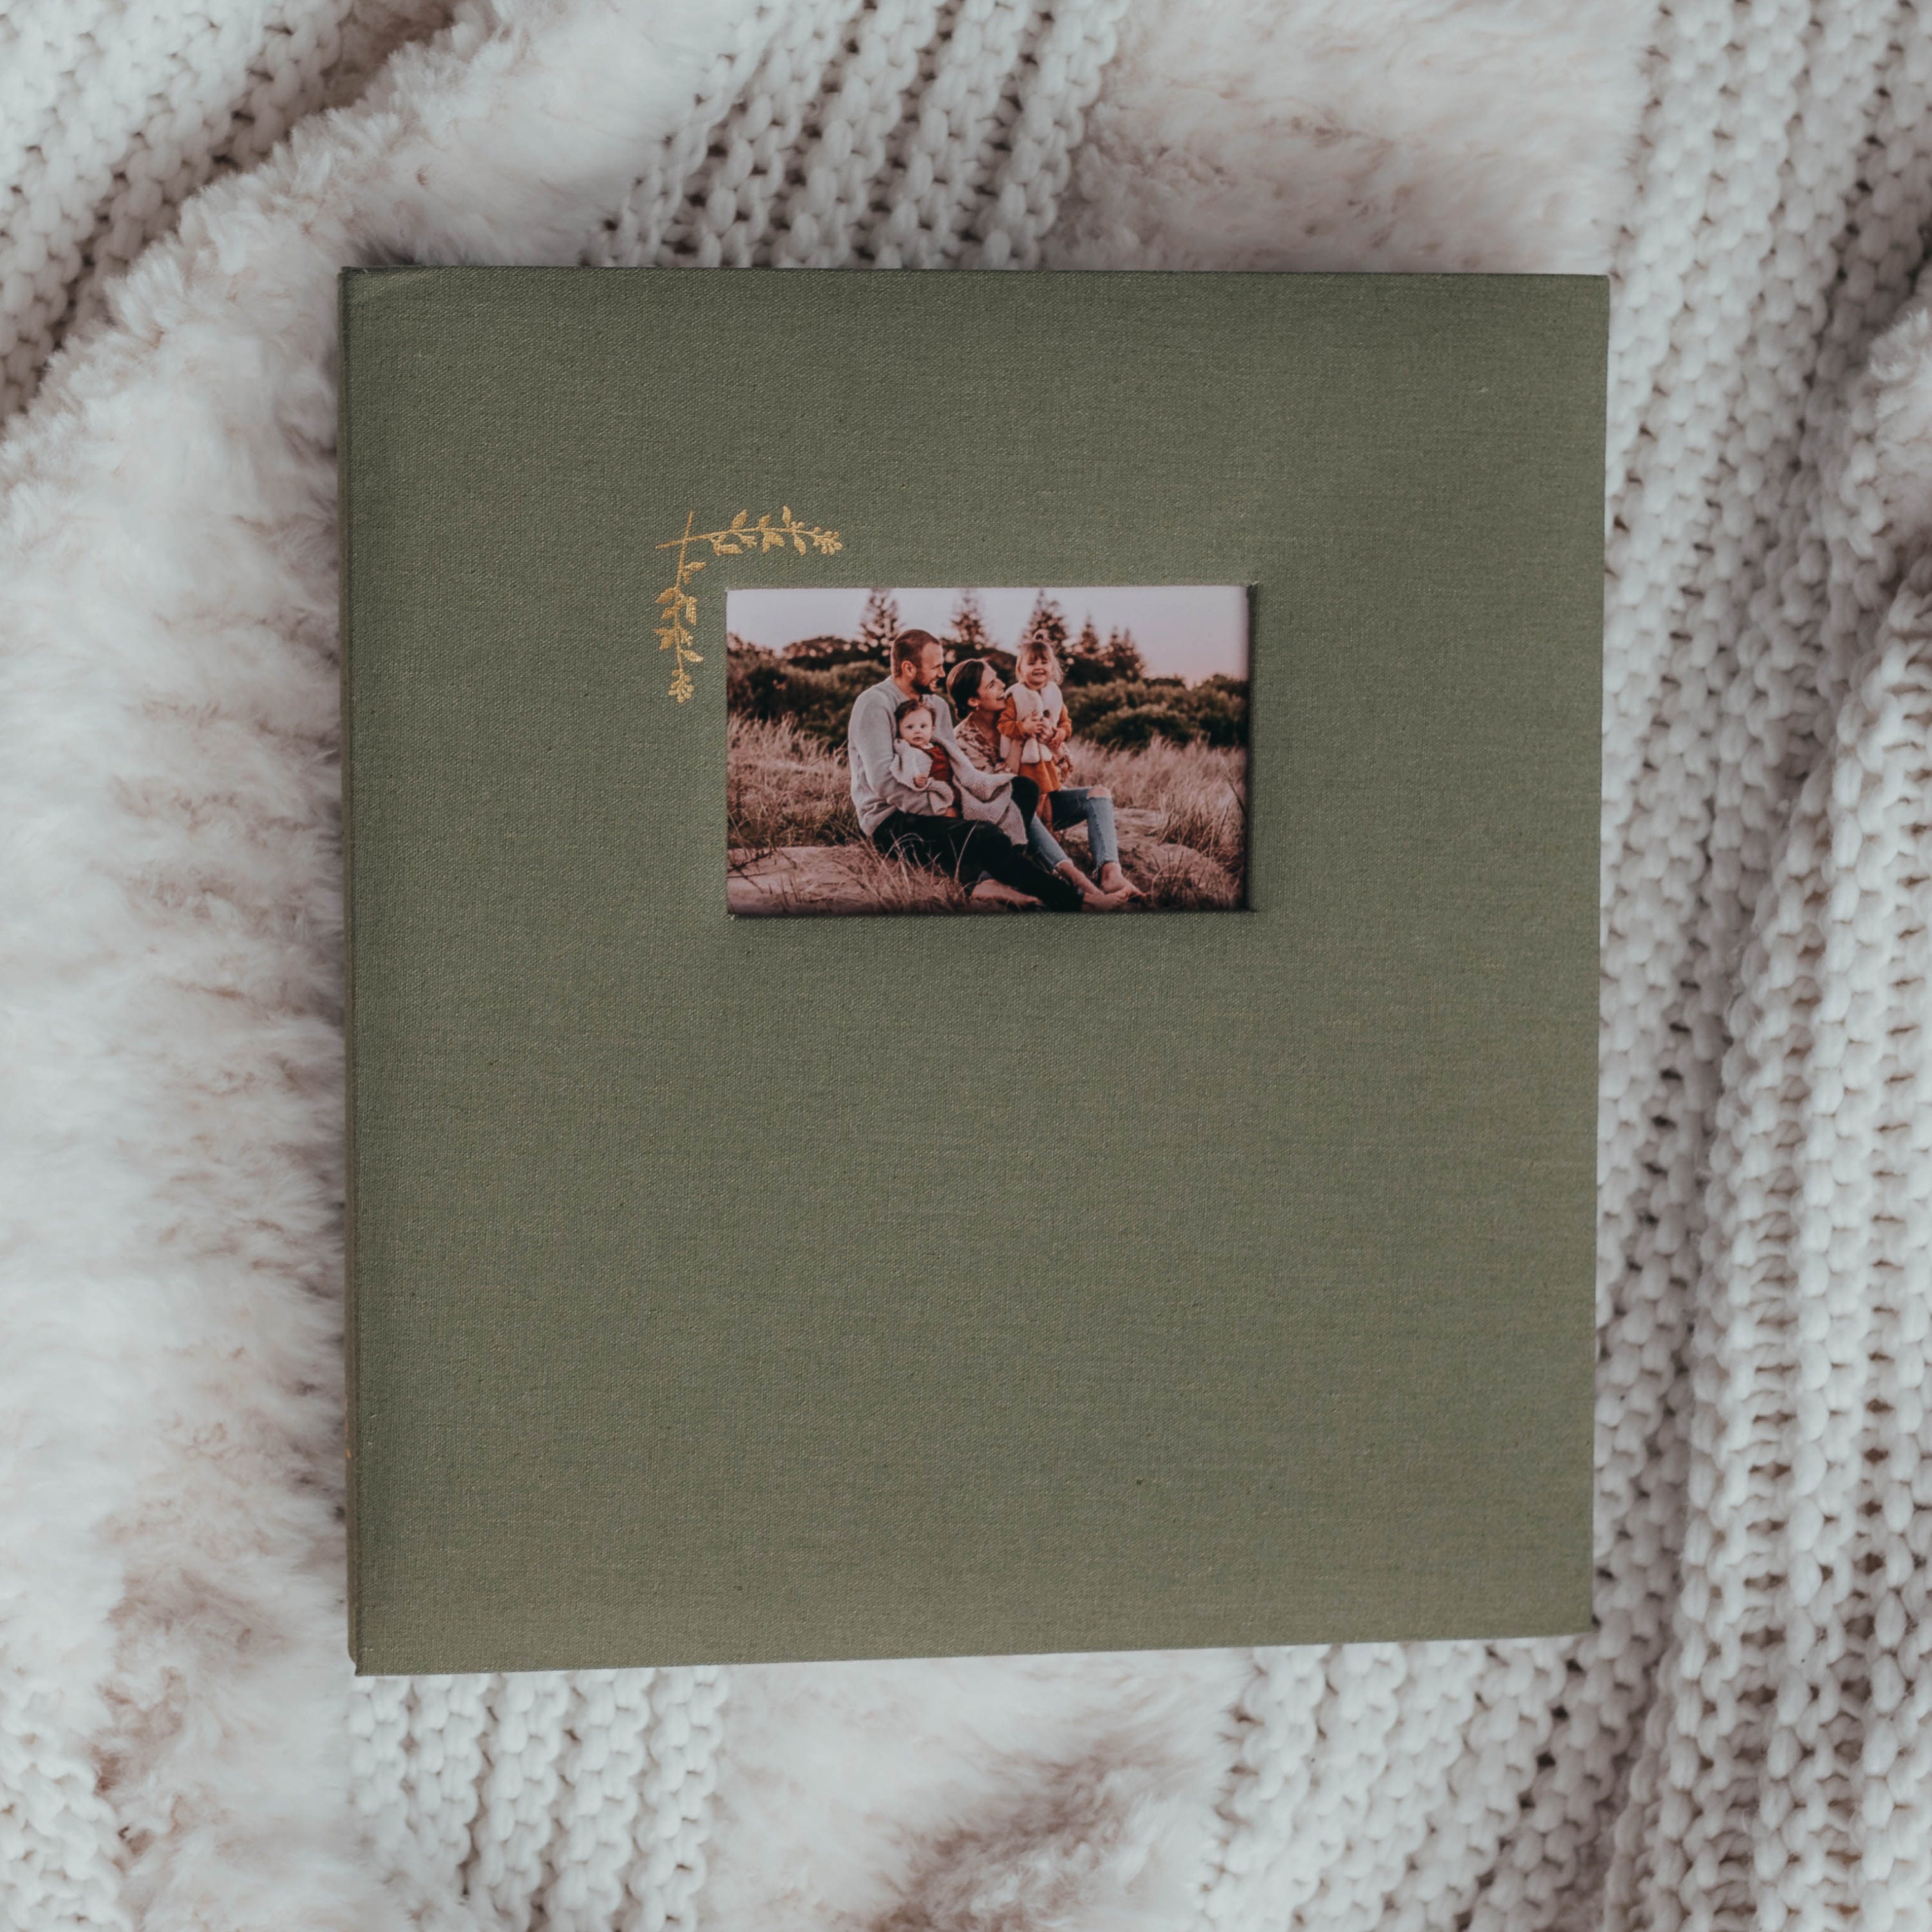 Bastex Small Scrapbook. Kraft Hardcover Photo Album, Fits 4x6 inch Photos. Perfect for DIY Hand Made Scrap Booking, Our Adventure Book, Memory Albums